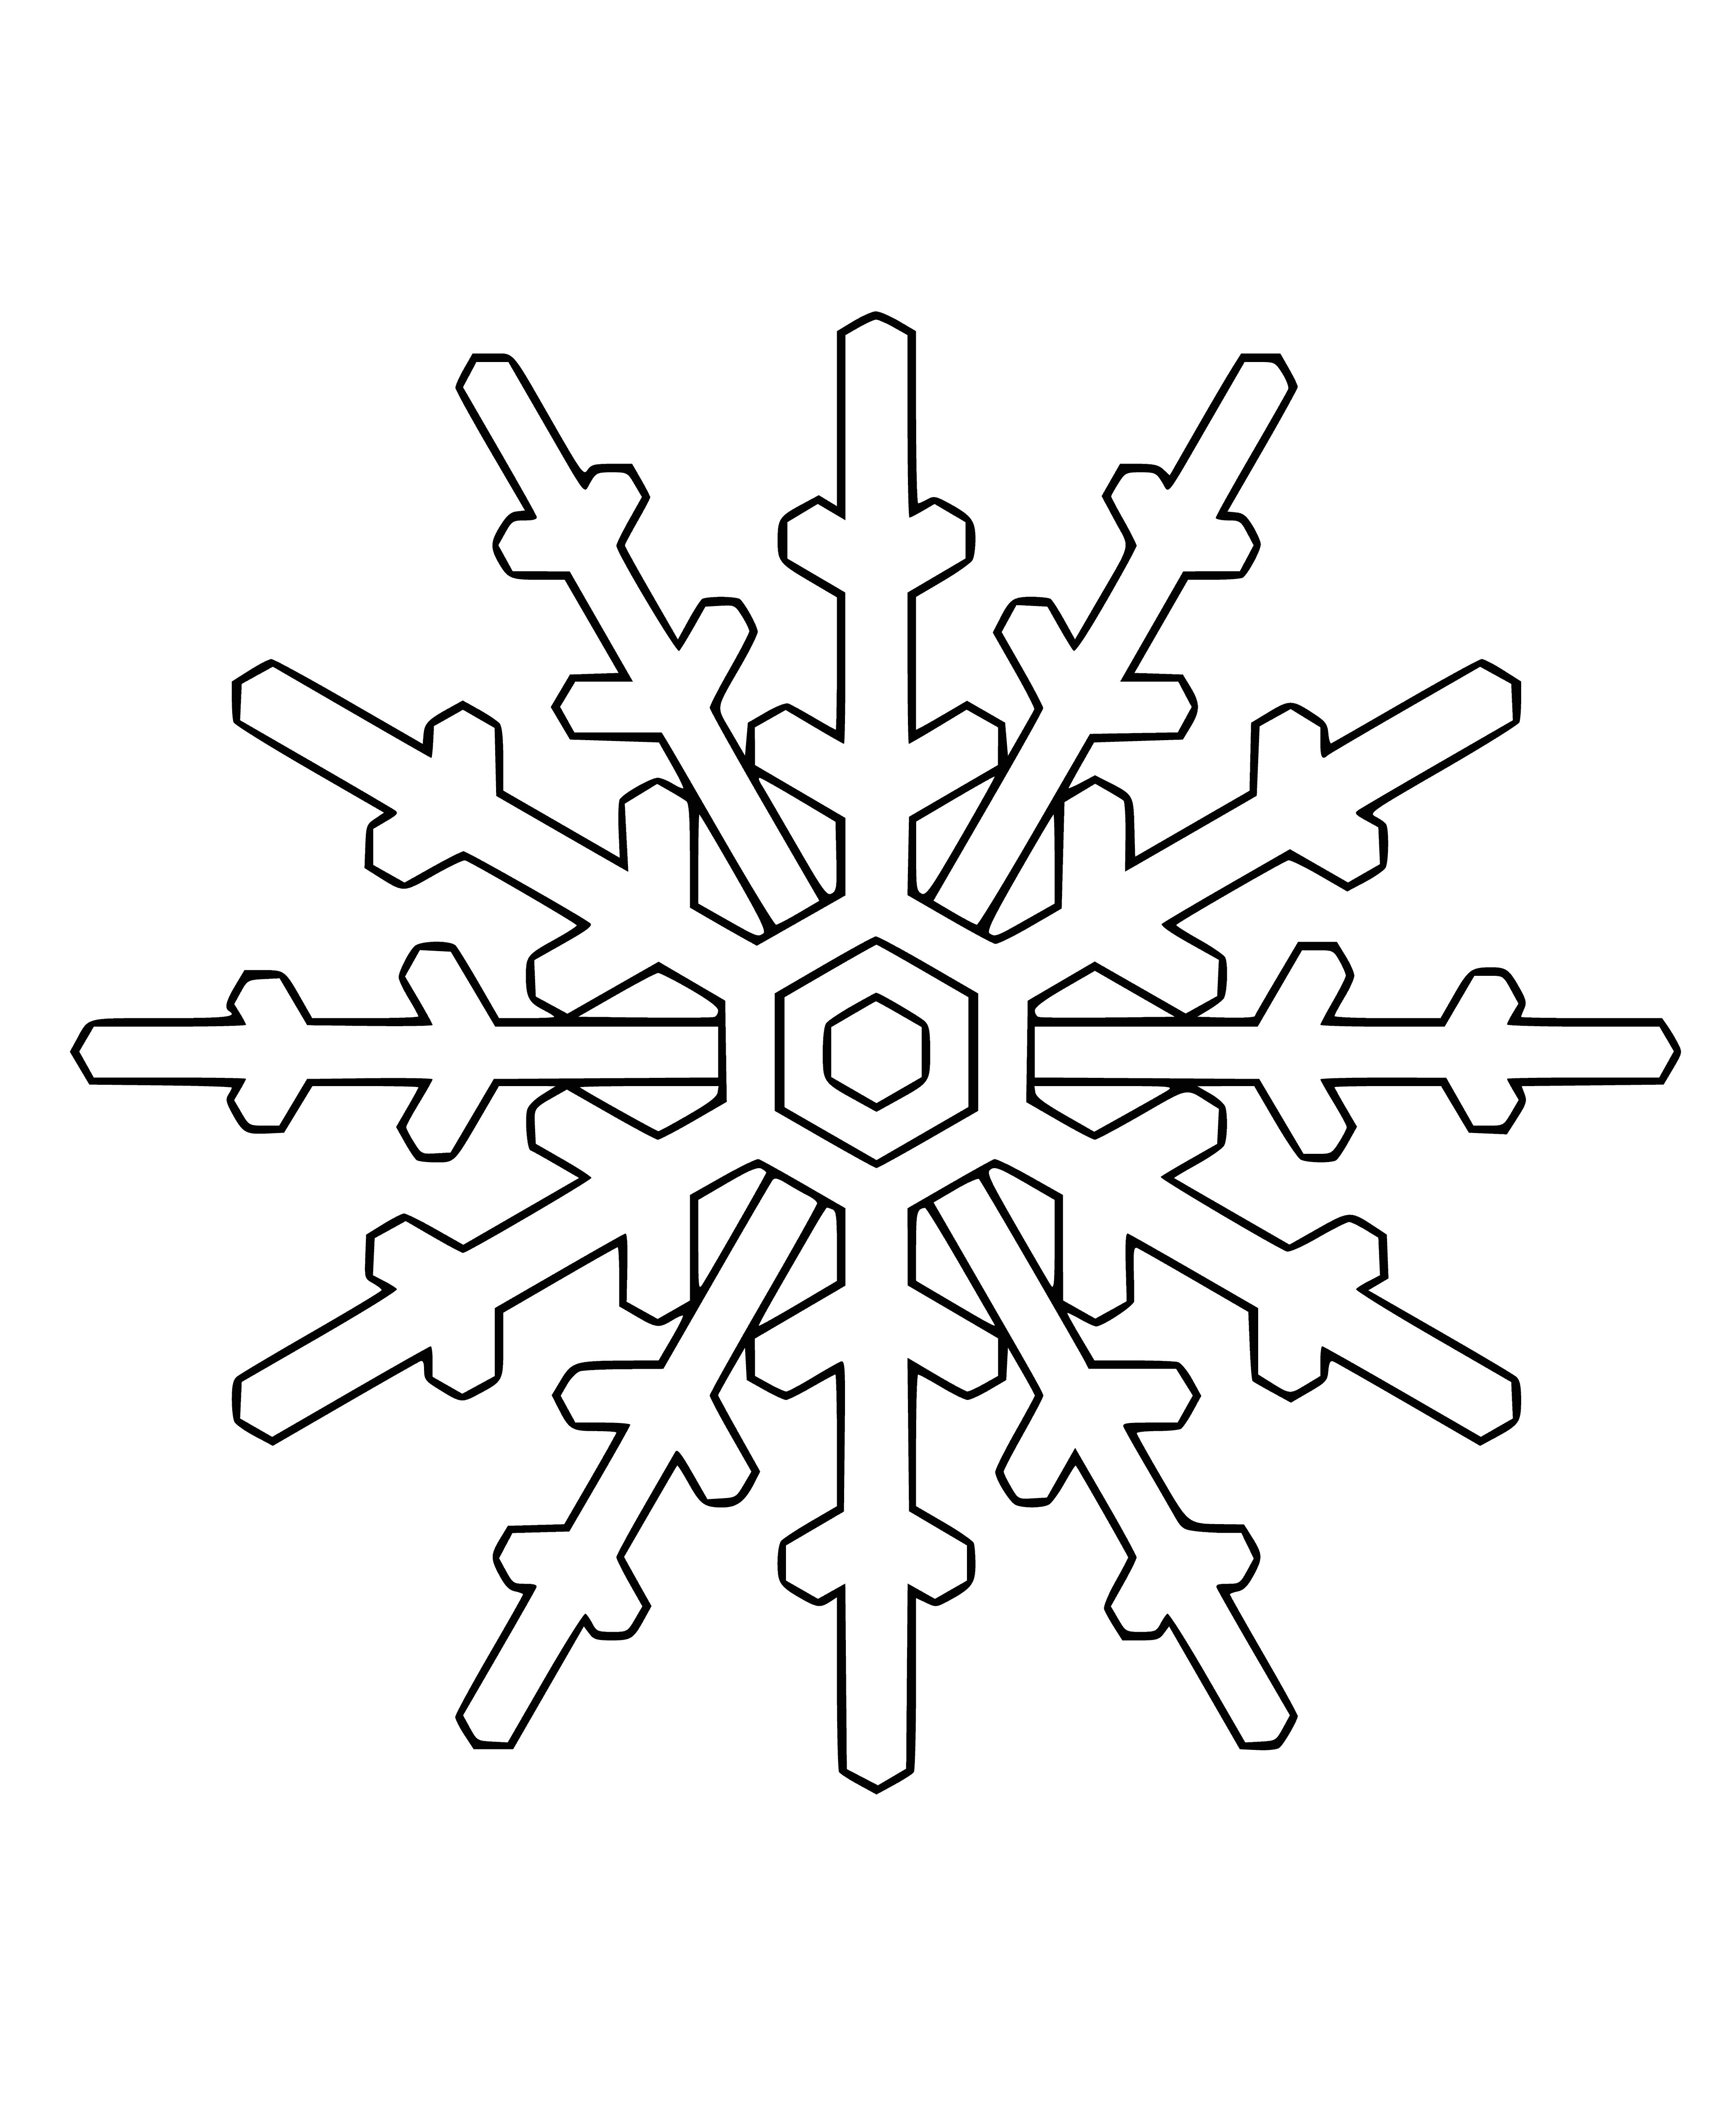 coloring page: Beautiful snowflakes of various sizes, shapes, and patterns fill the coloring page!